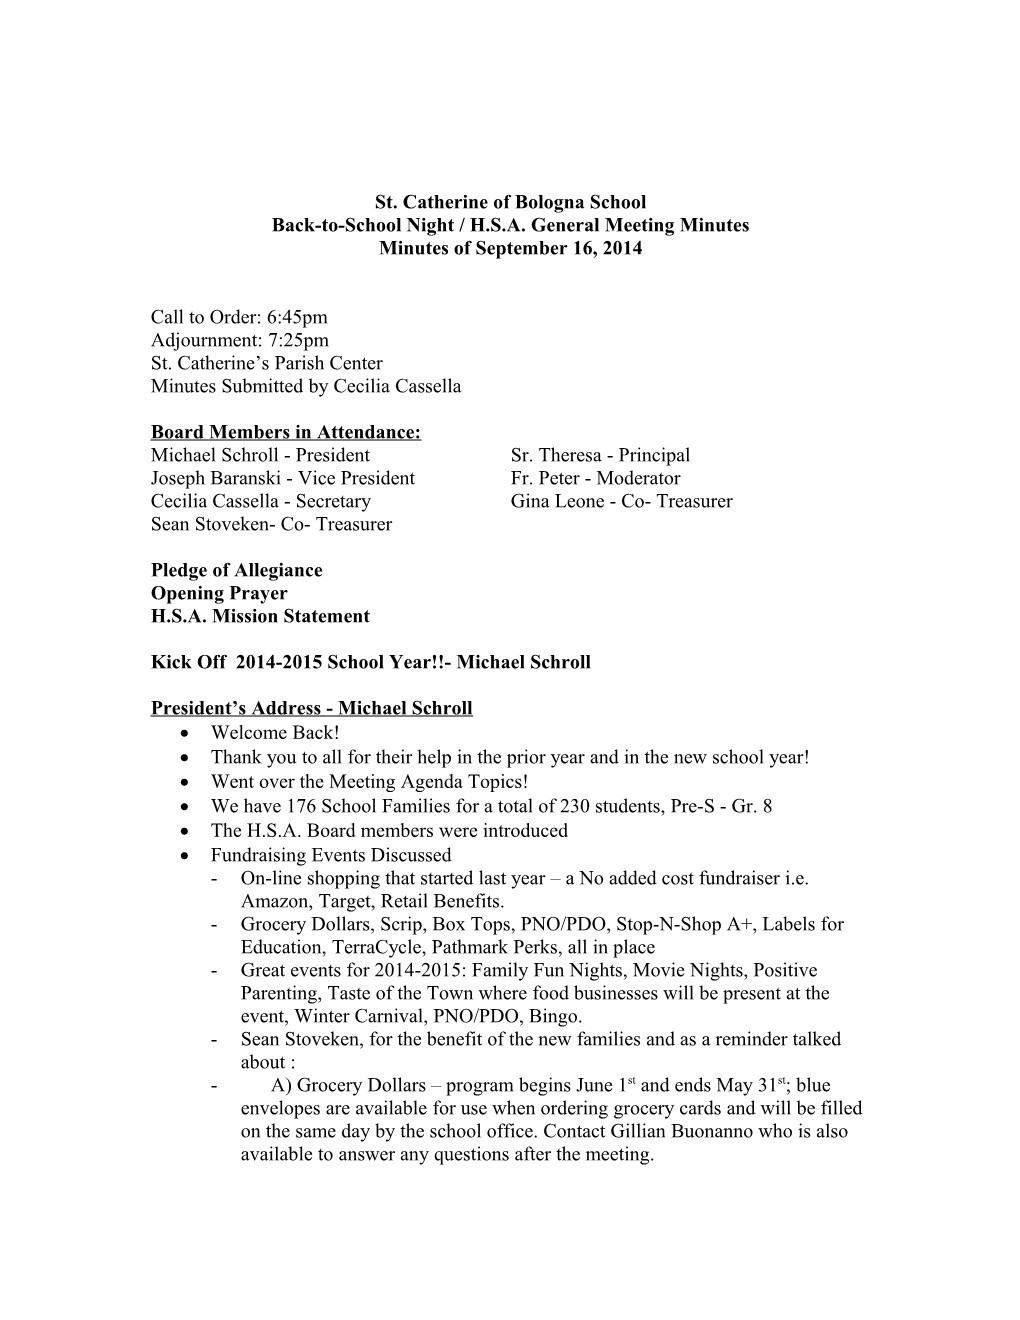 Back-To-School Night / H.S.A. General Meeting Minutes